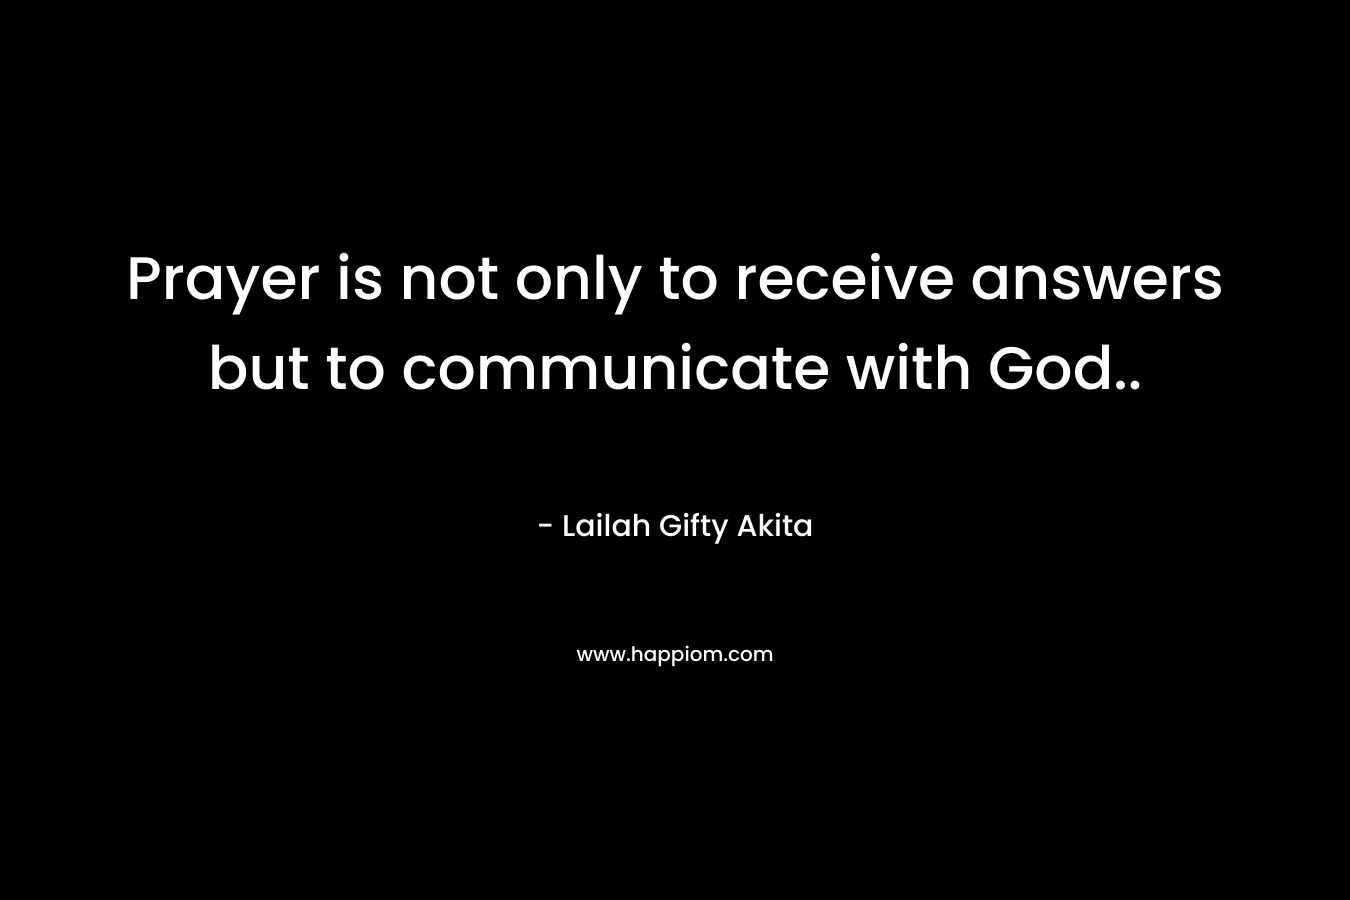 Prayer is not only to receive answers but to communicate with God..